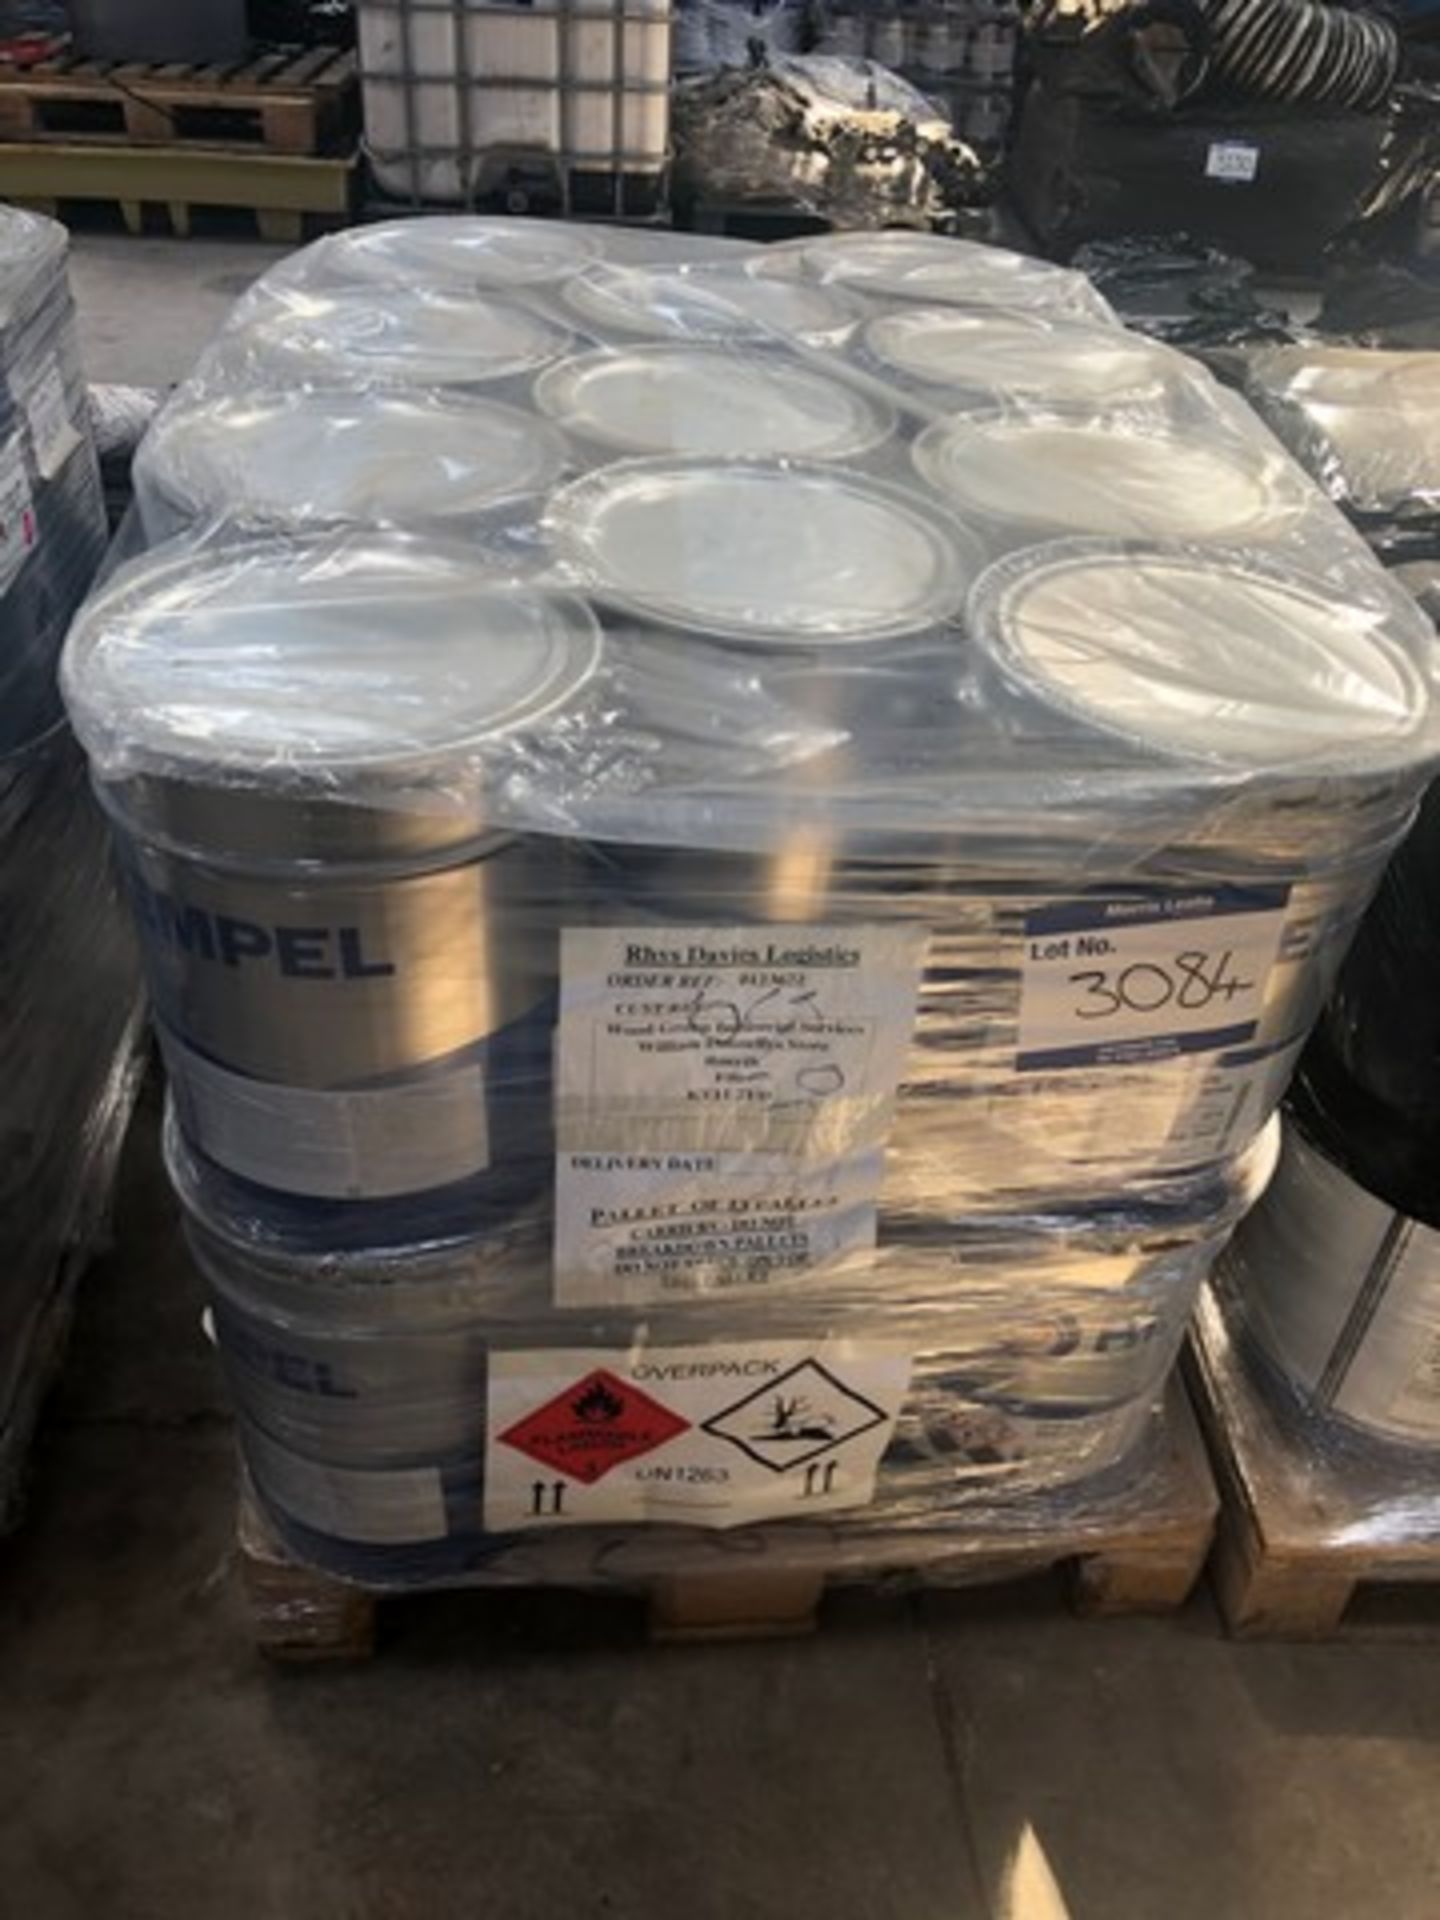 Pallet of Hempel non skid 45340/4534A approx 20 tins